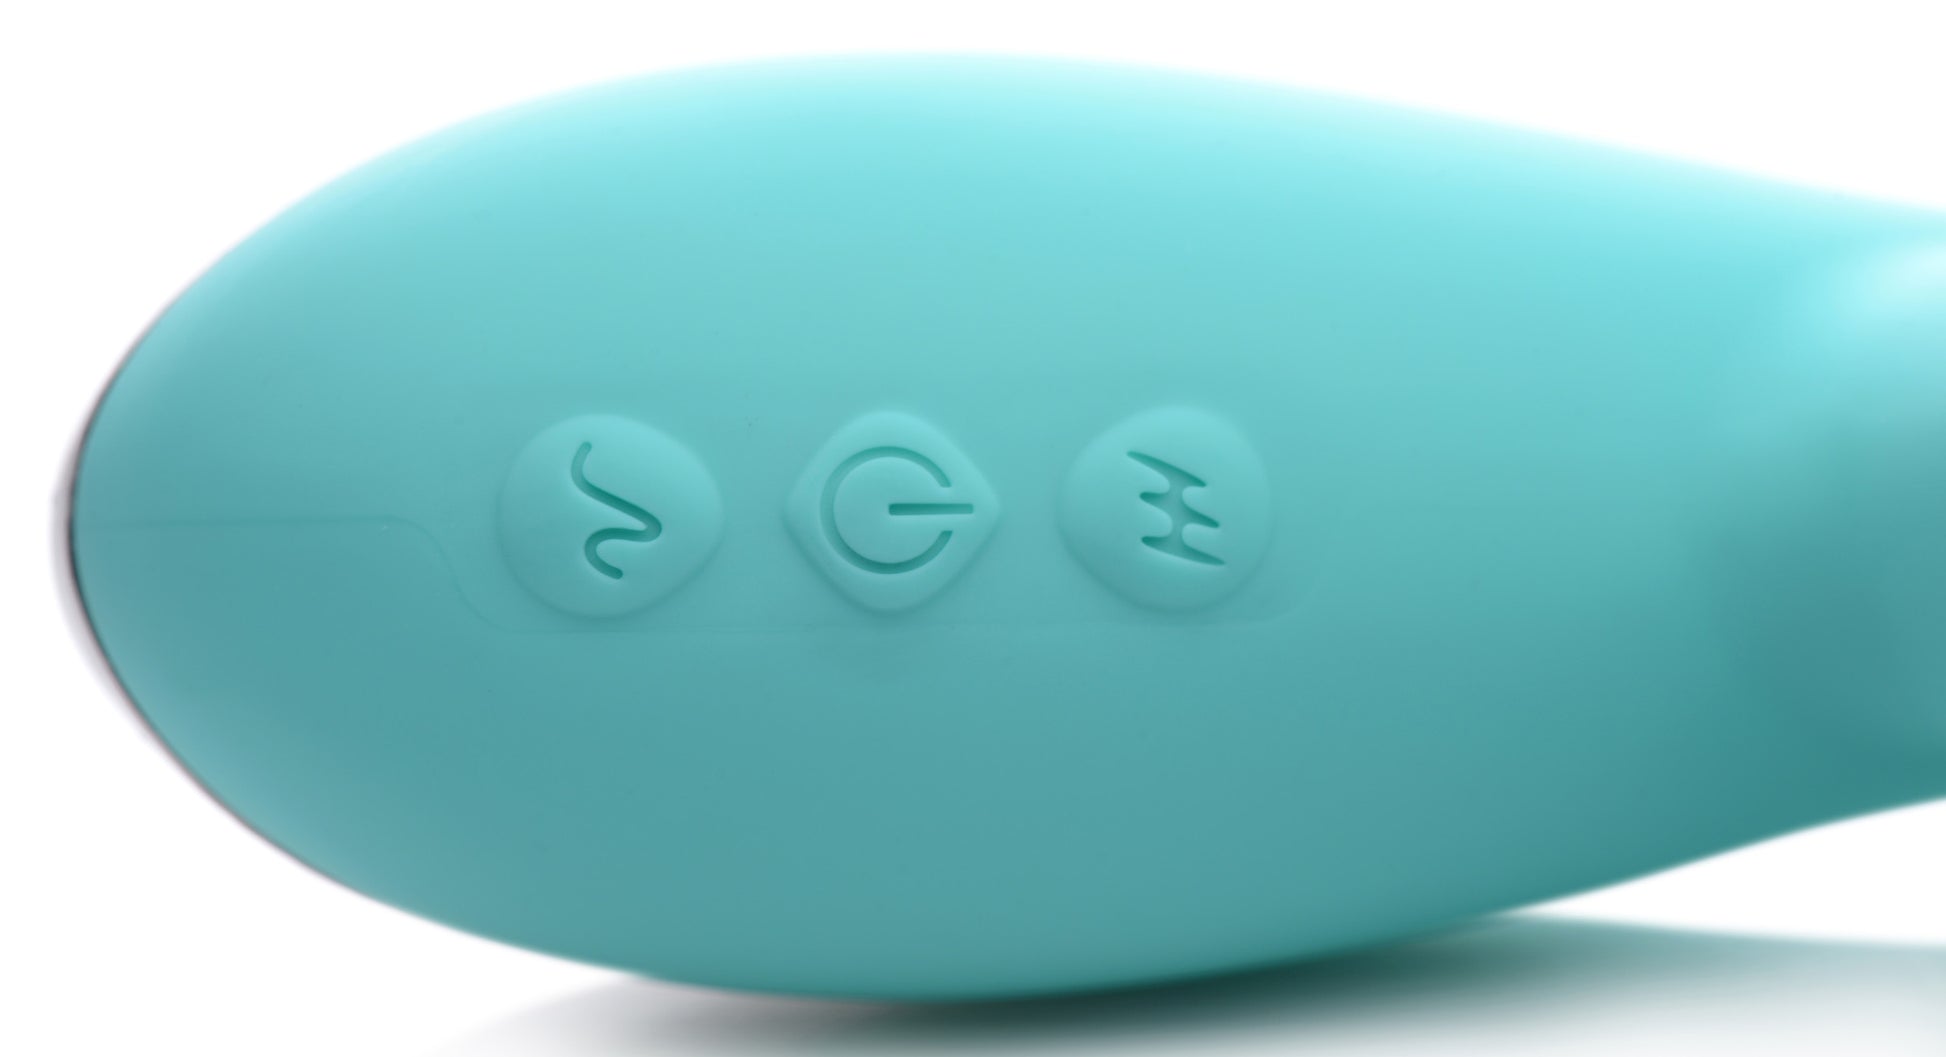 Shegasm 5 Star 7X Suction Come-Hither Silicone Rabbit - Teal - UABDSM